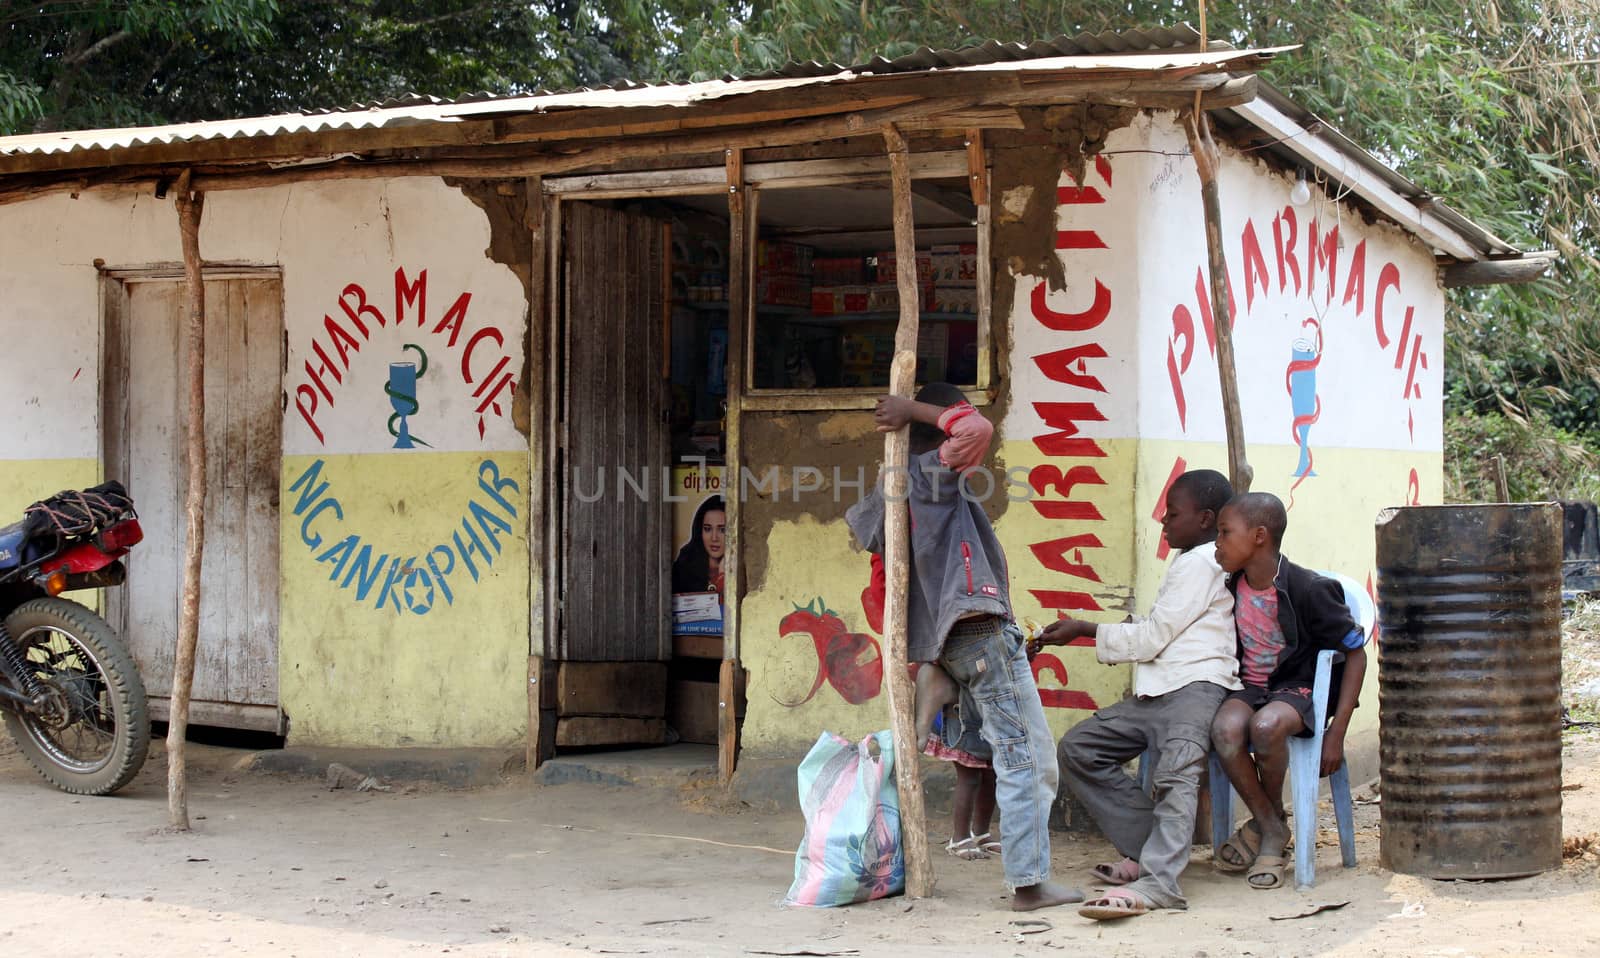 Village pharmacy in DR Congo. Kinshasa Province, Plateau de Bateke, road N1. August 25, 2010. Small retail shops like this are still the main source of medical service in rural areas of Congo. Often the quality of drugs is questionable.